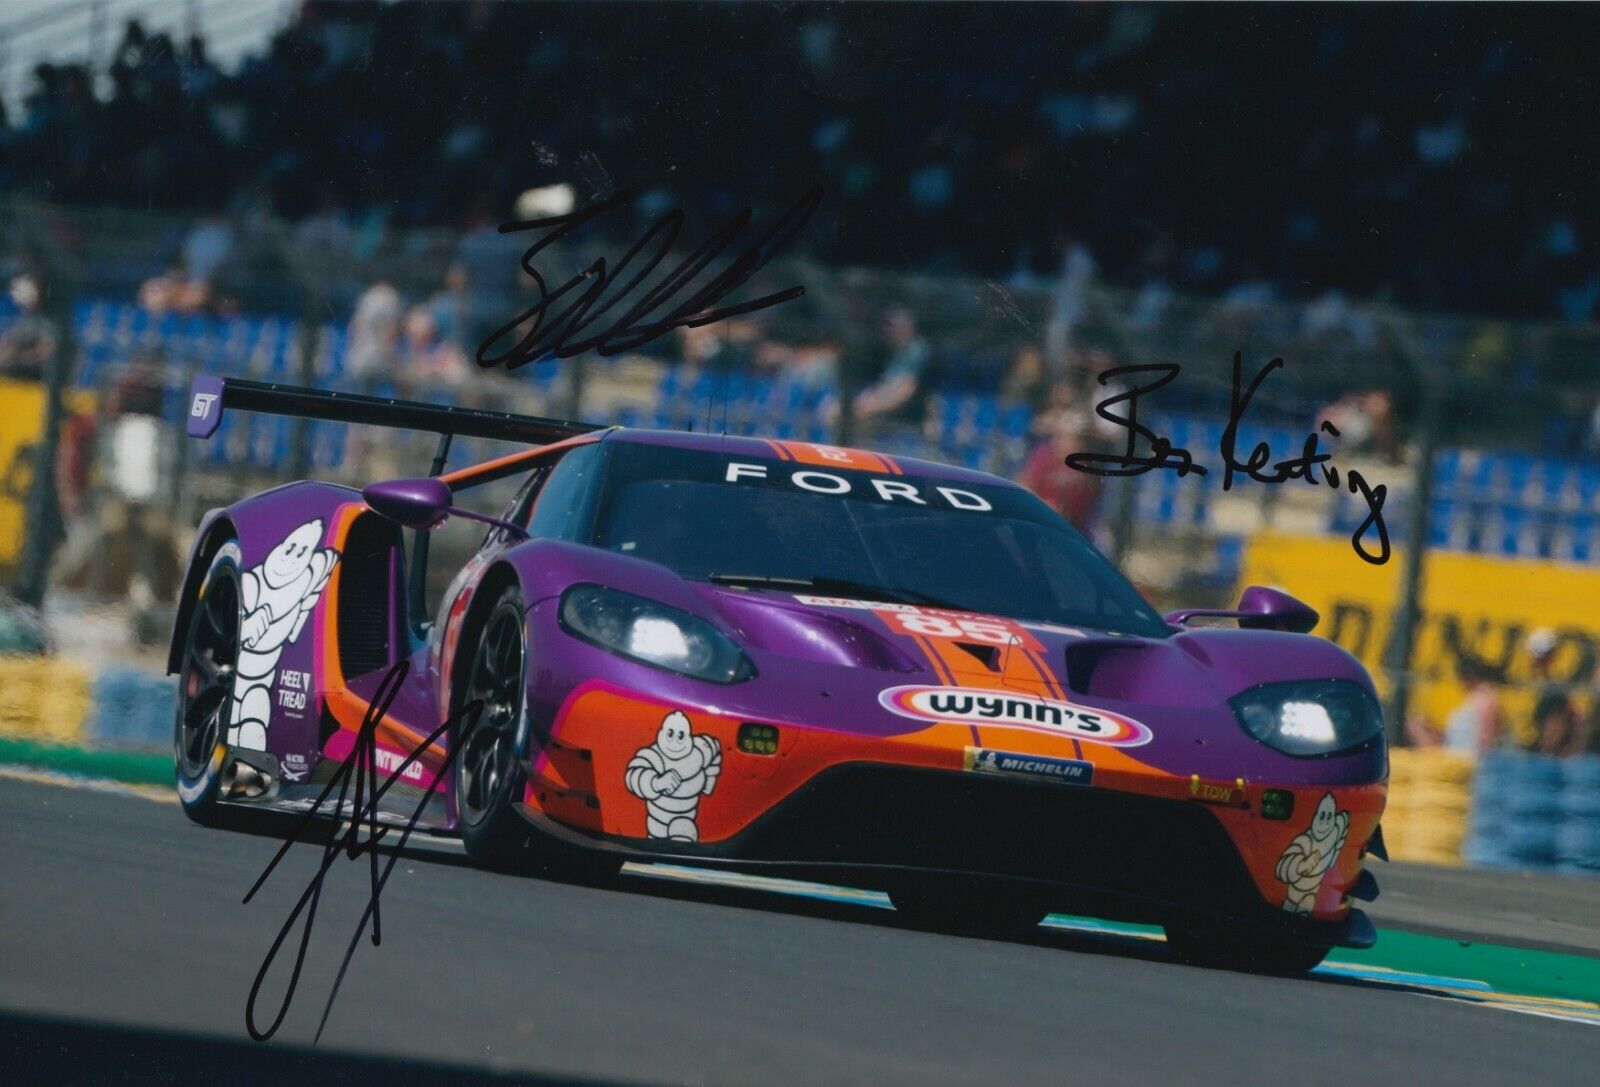 Bleekemolen, Fraga, Keating Hand Signed Ford GT 12x8 Photo Poster painting 2019 Le Mans.